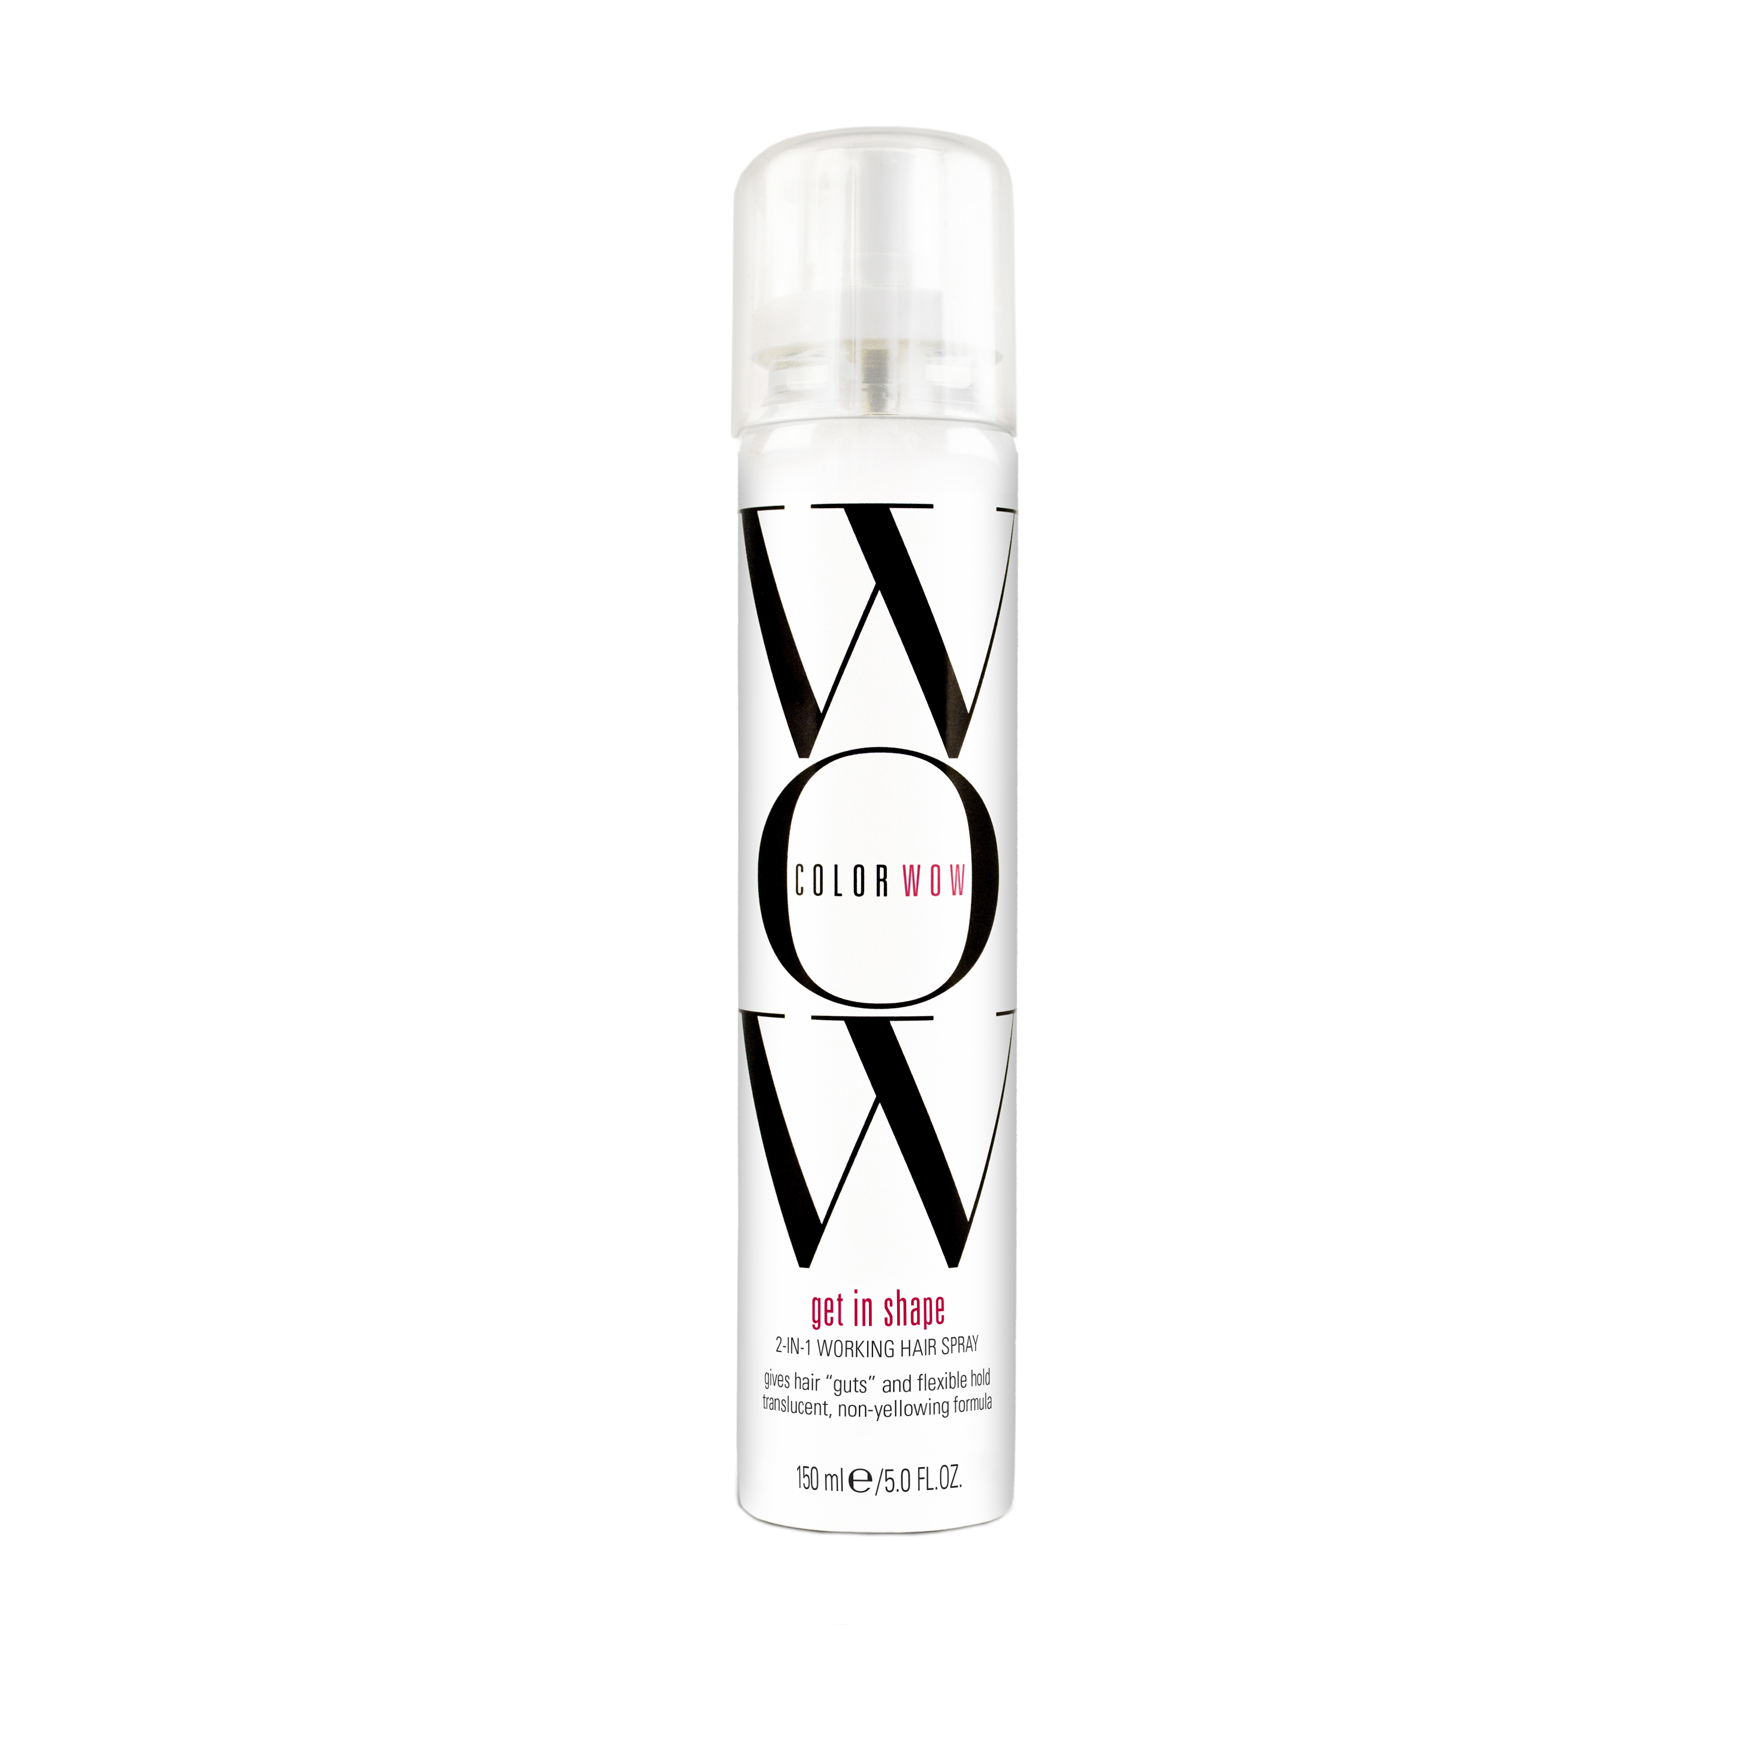 Color Wow Get in Shape 2-In-1 Working Hair Spray | Space NK